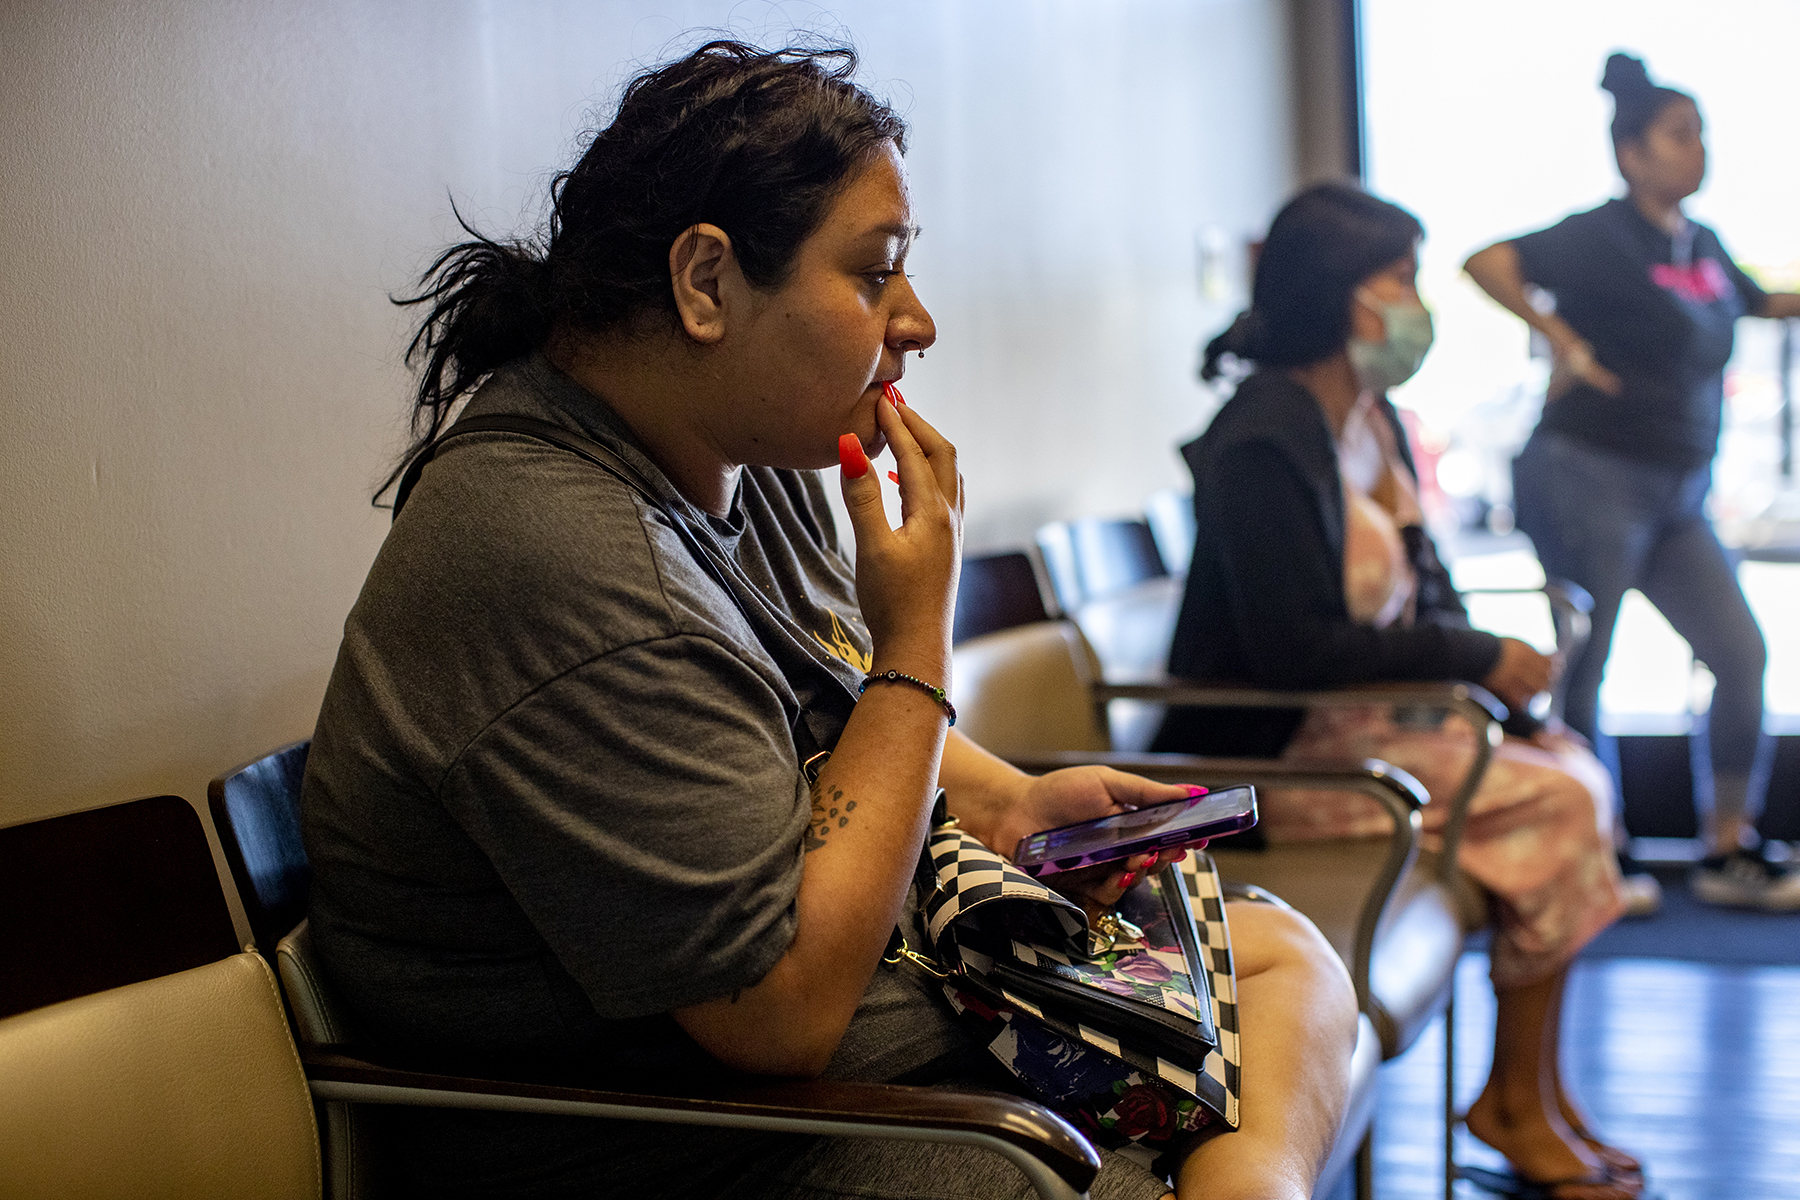 Sitting in the waiting room a patient contemplates her abortion choices after being told that the Supreme Court overturned Roe v. Wade at Alamo Women's Reproductive Services where she had an appointment.